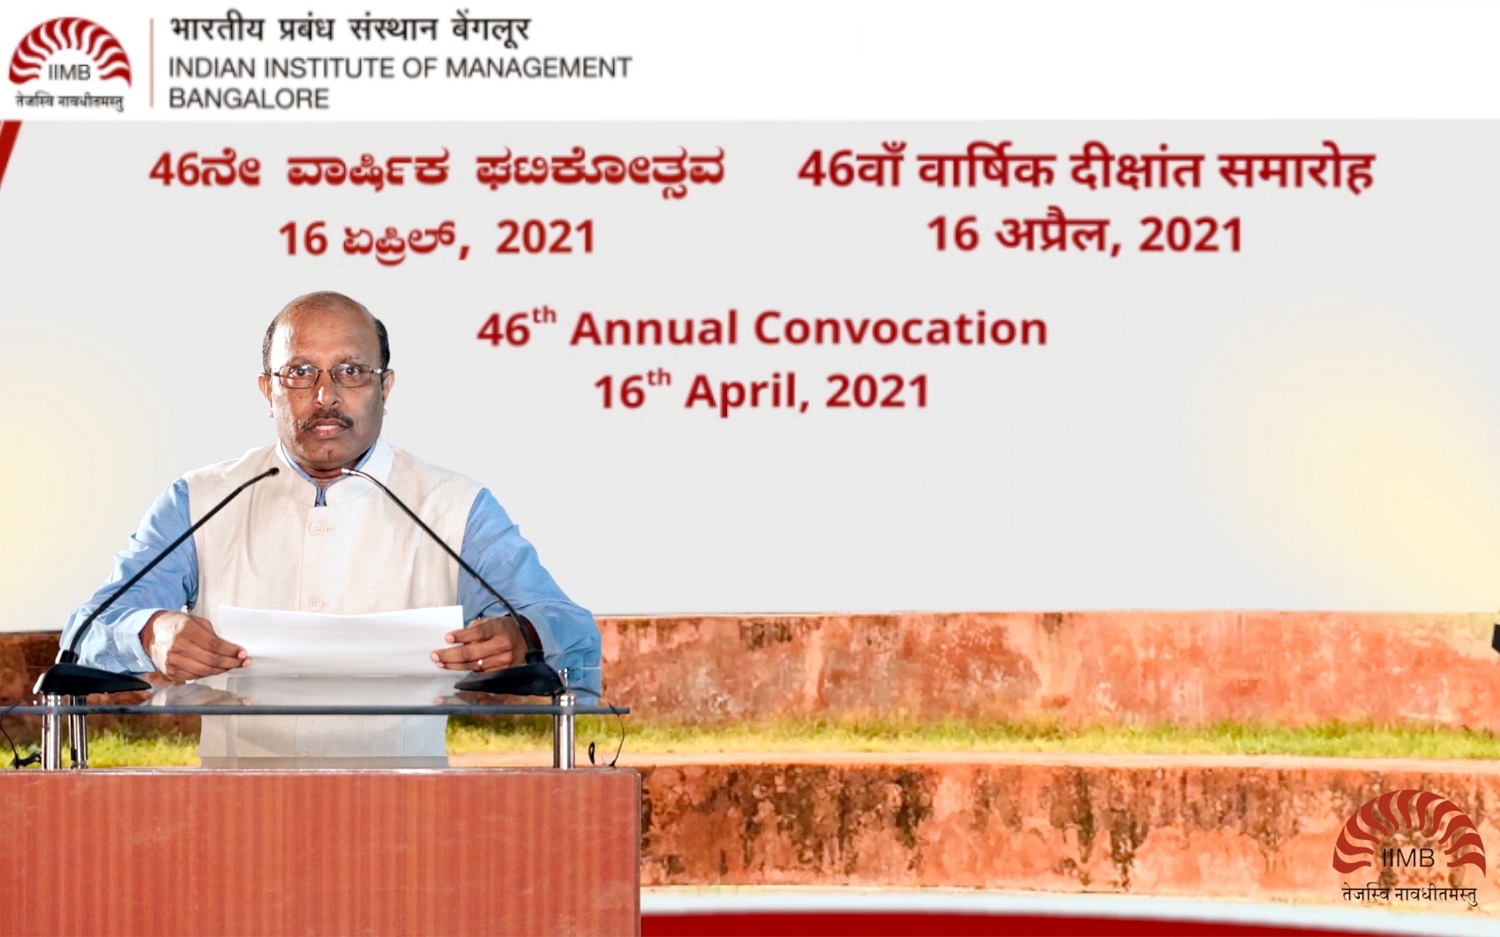 Chief Administrative Officer Col. (Retd.) S.D. Aravendan welcomes the virtual audience to the 46th Convocation on April 16th, 2021.